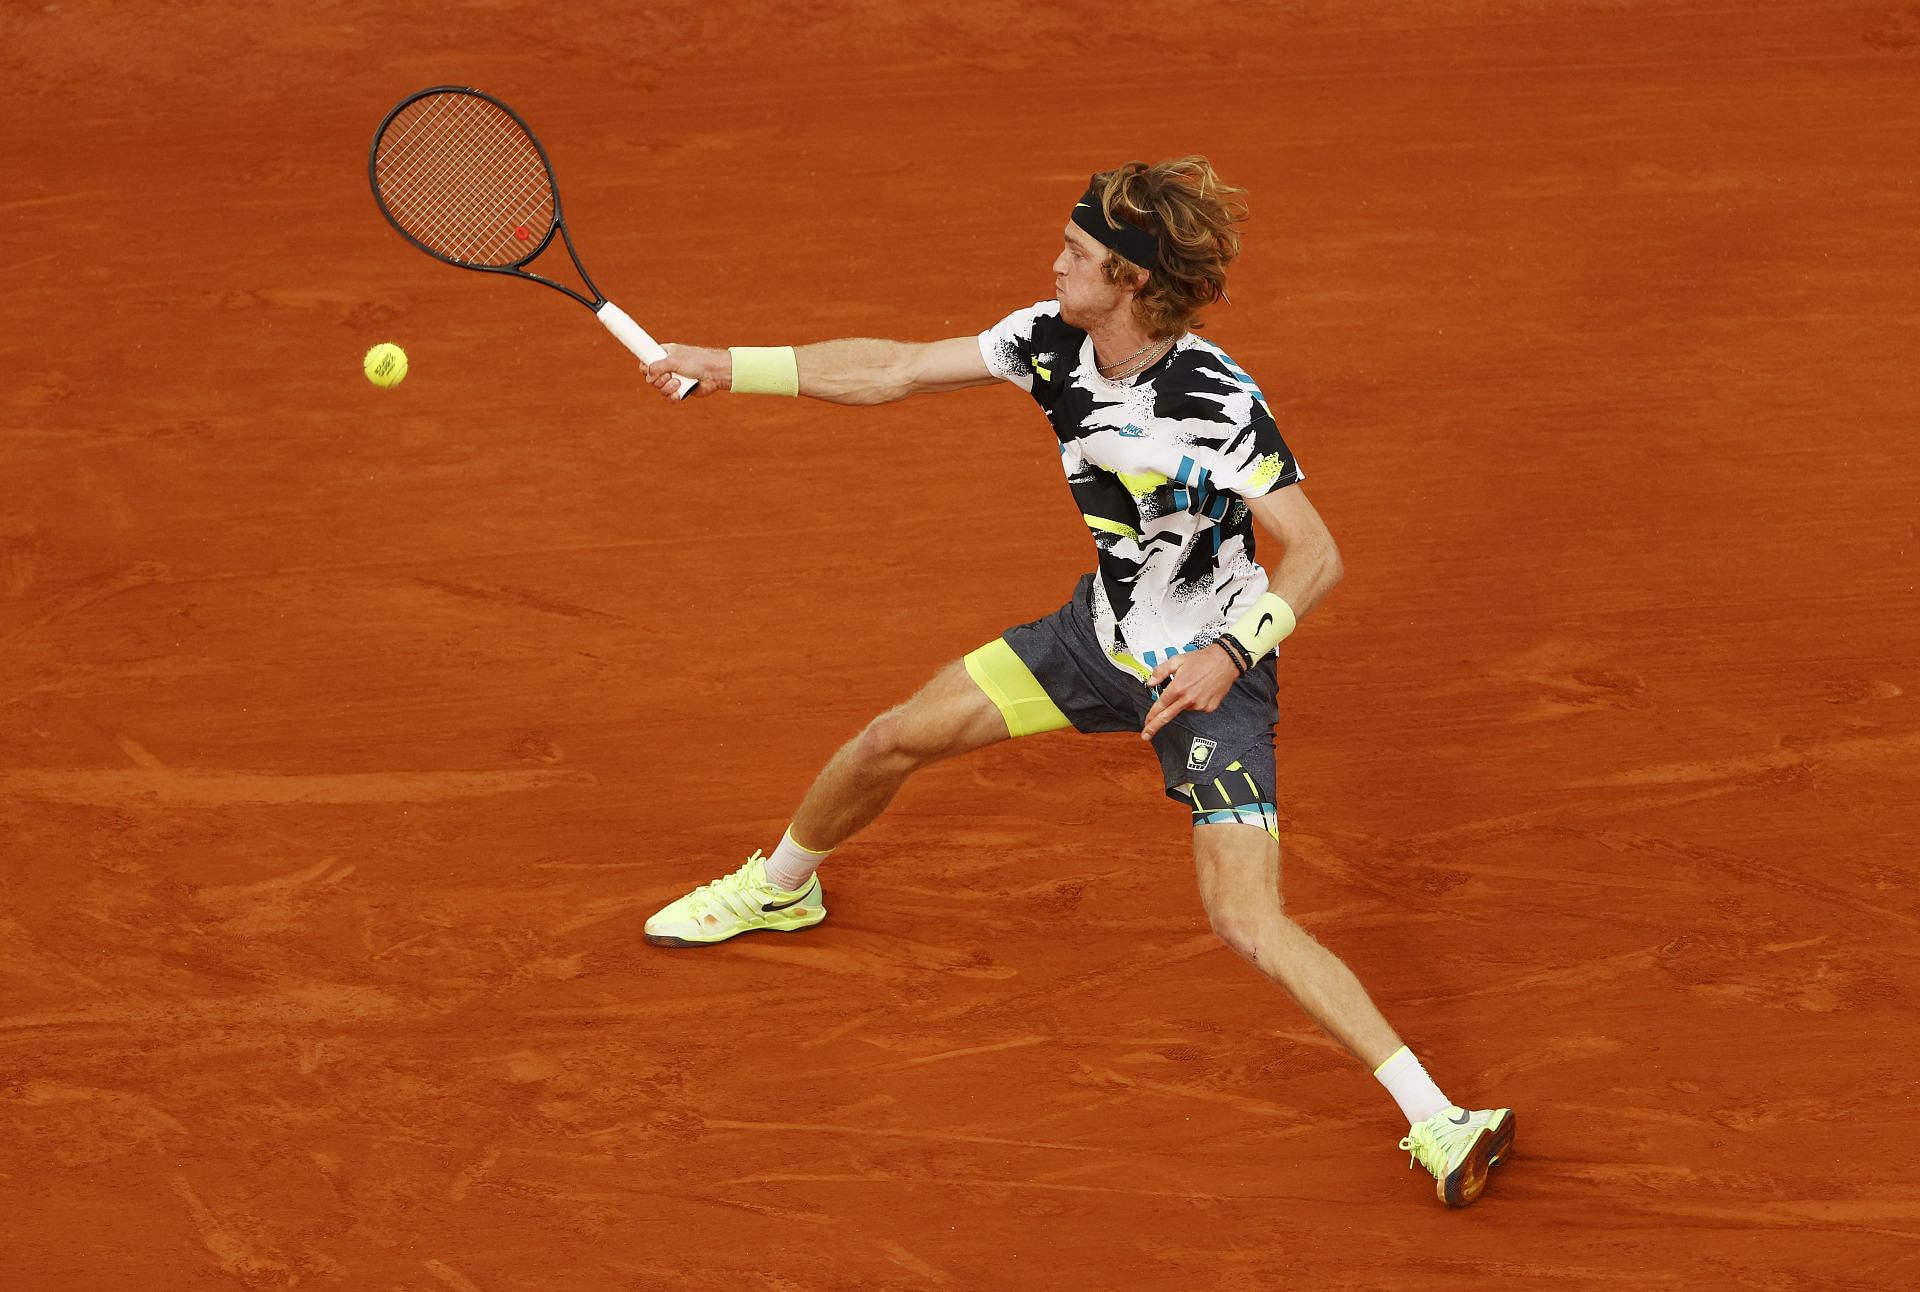 Rublev in action at the quarterfinals of the 2020 French Open